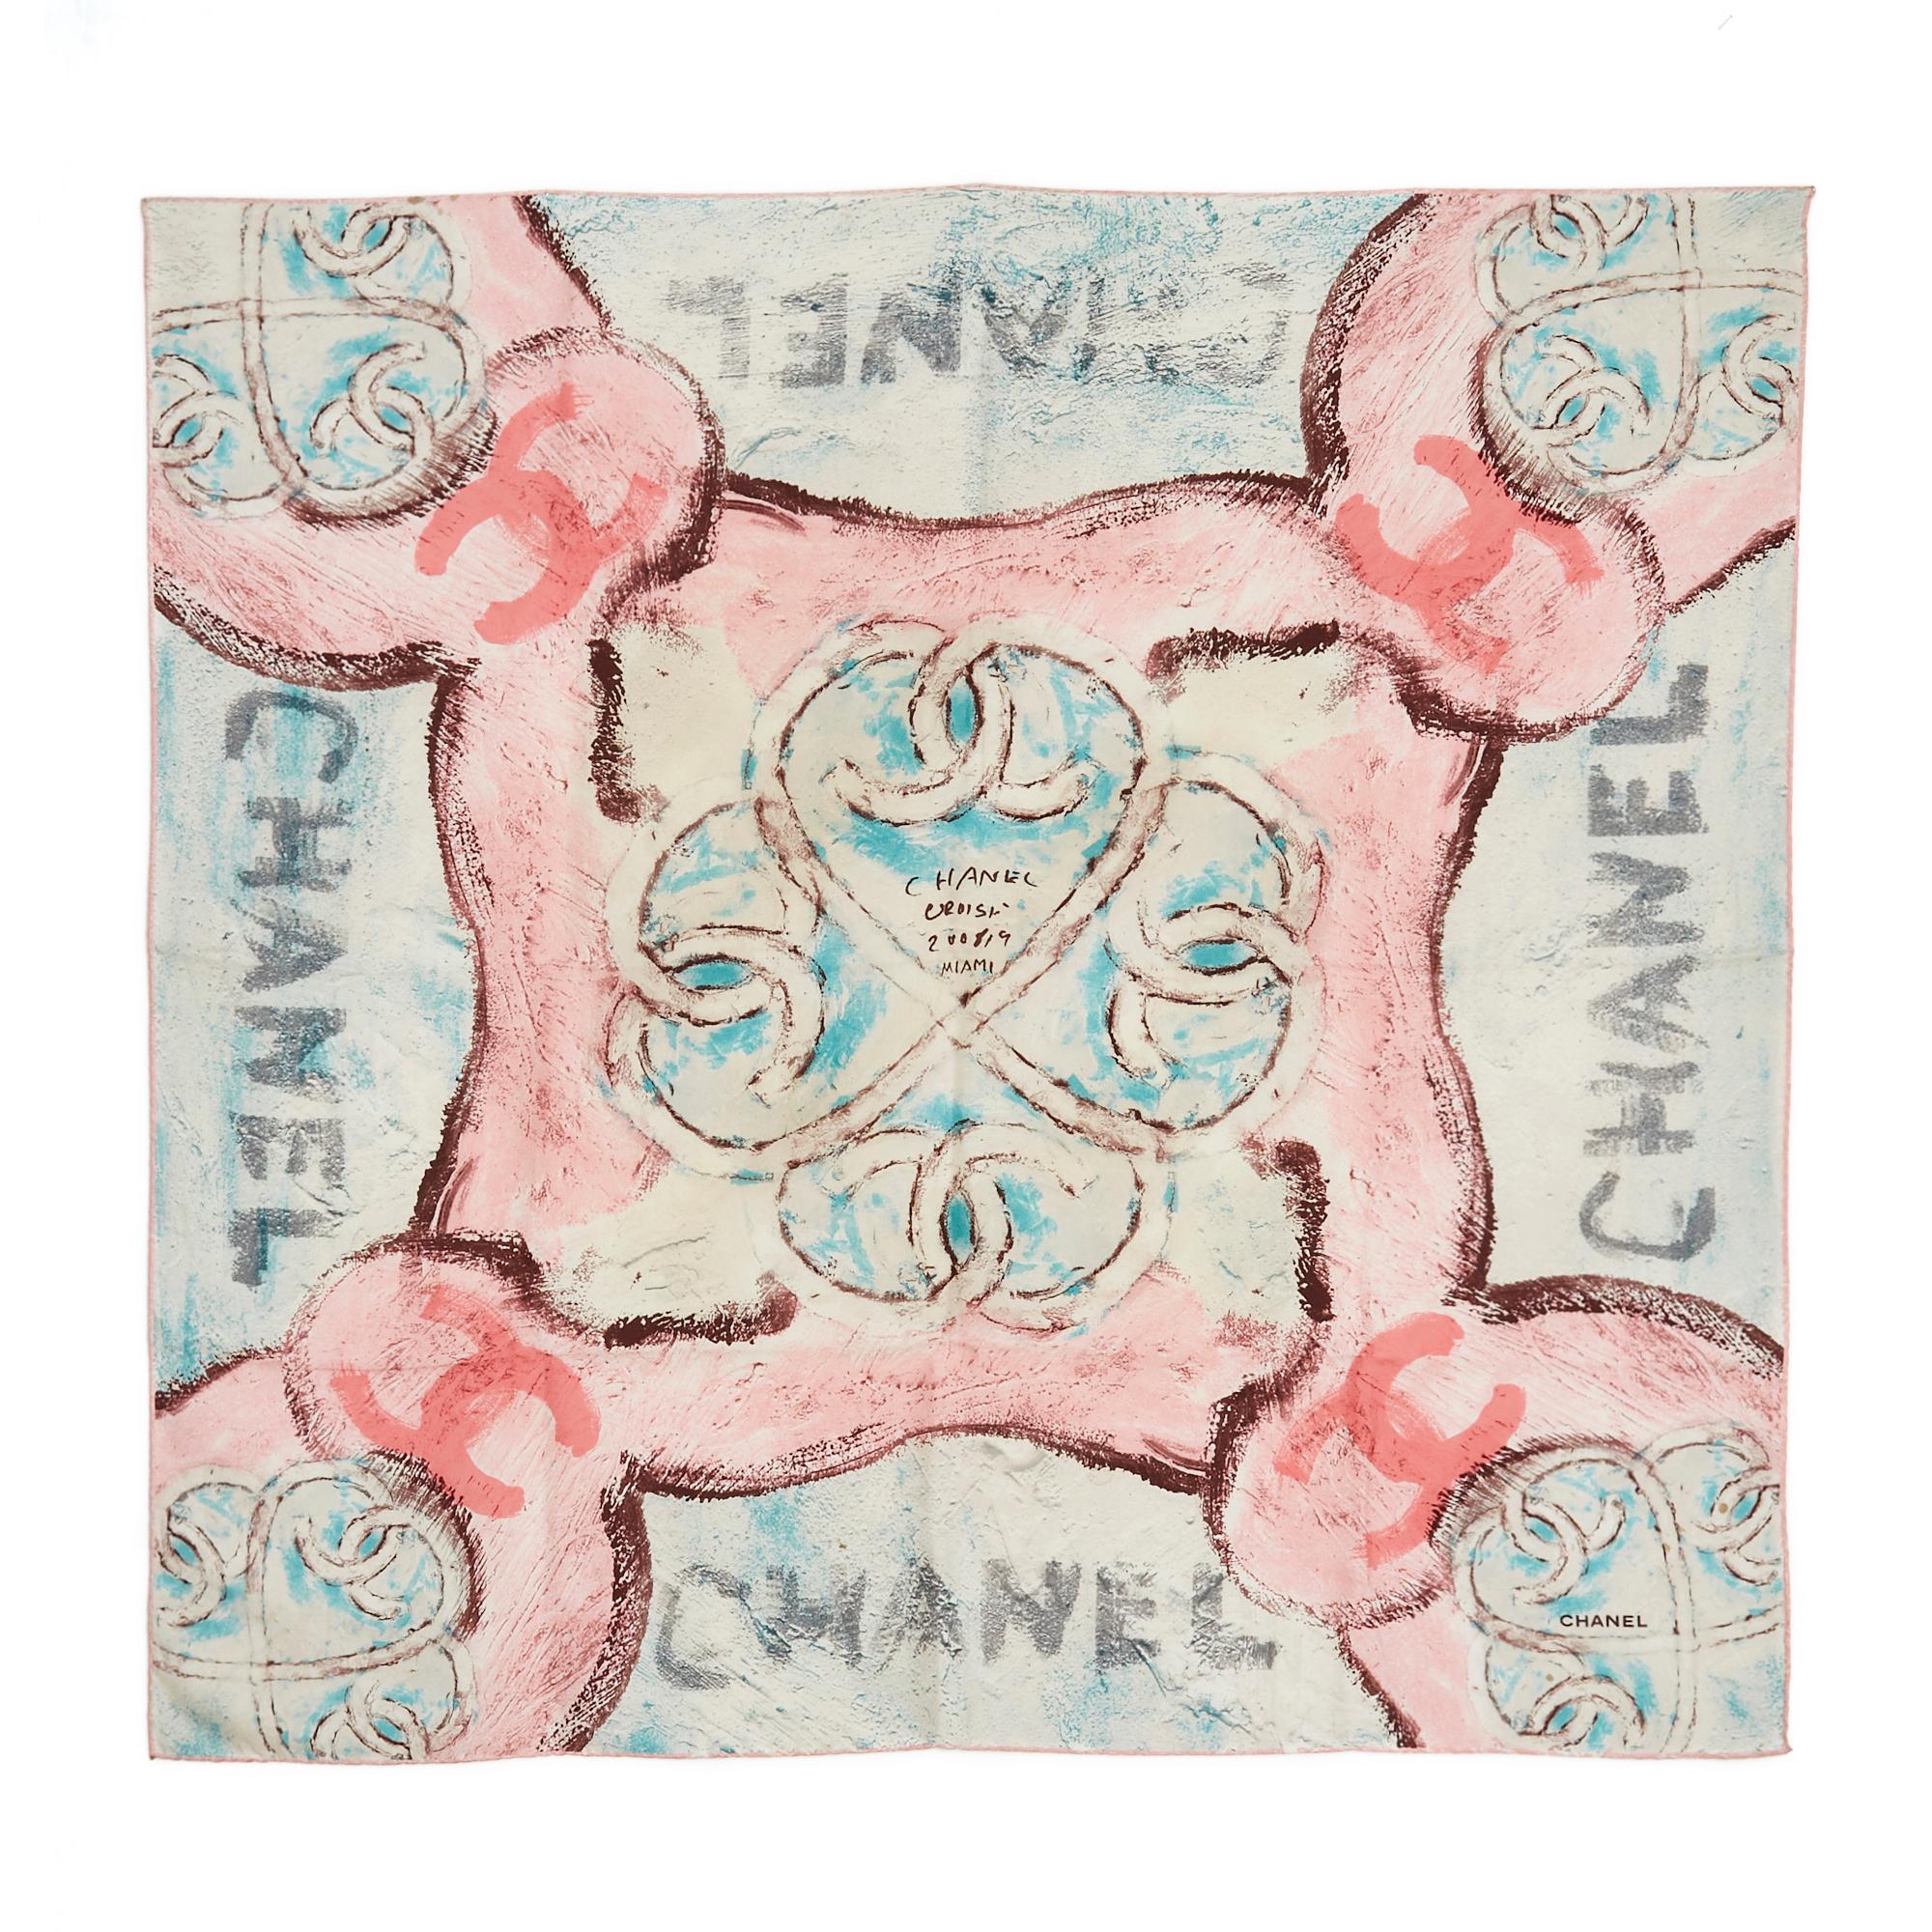 Chanel square 85 cm scarf from the 2008/2009 cruise collection in Miami in silk twill with heart and CC patterns in pastel pink and blue tones. Width x length 85cm. The scarf has been worn but it came out of the dry cleaning and is in very good